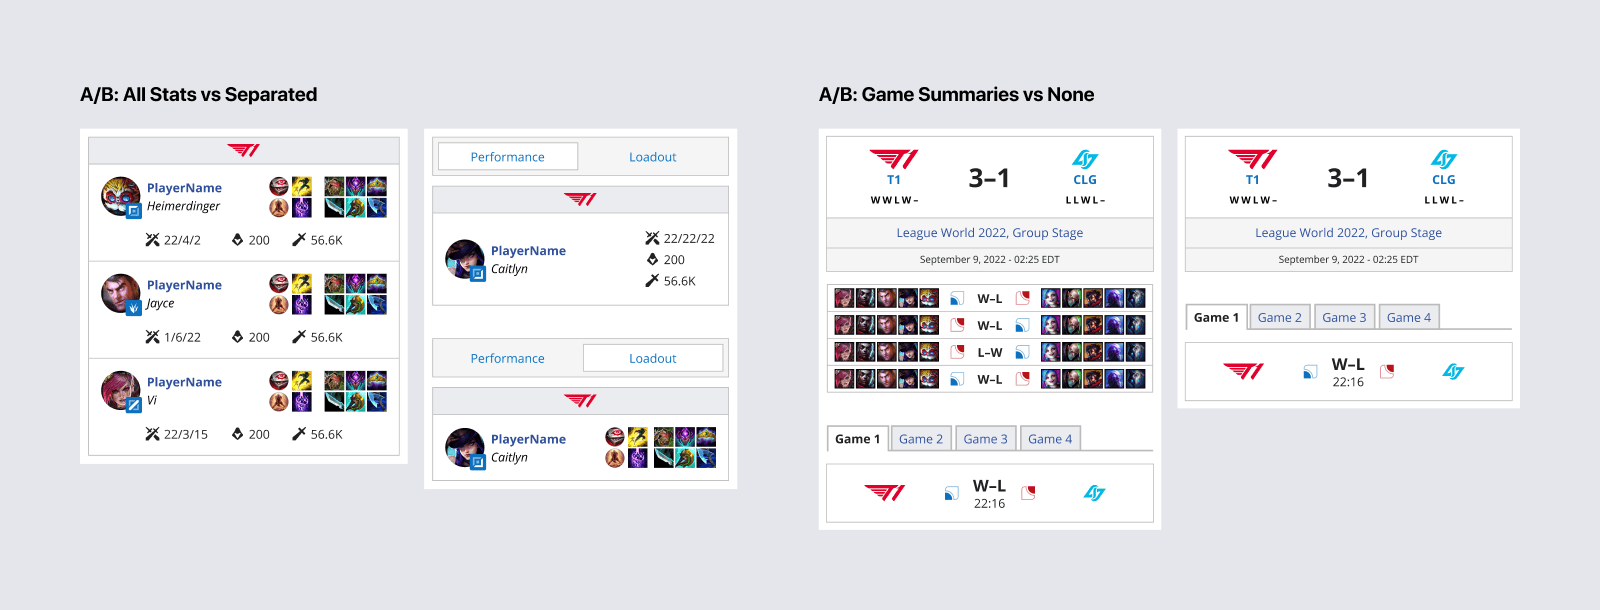 Future A/B tests to perform: Player components with all statistics vs separated statistics (pregame, player stats), and including game summaries on the match page, or not.